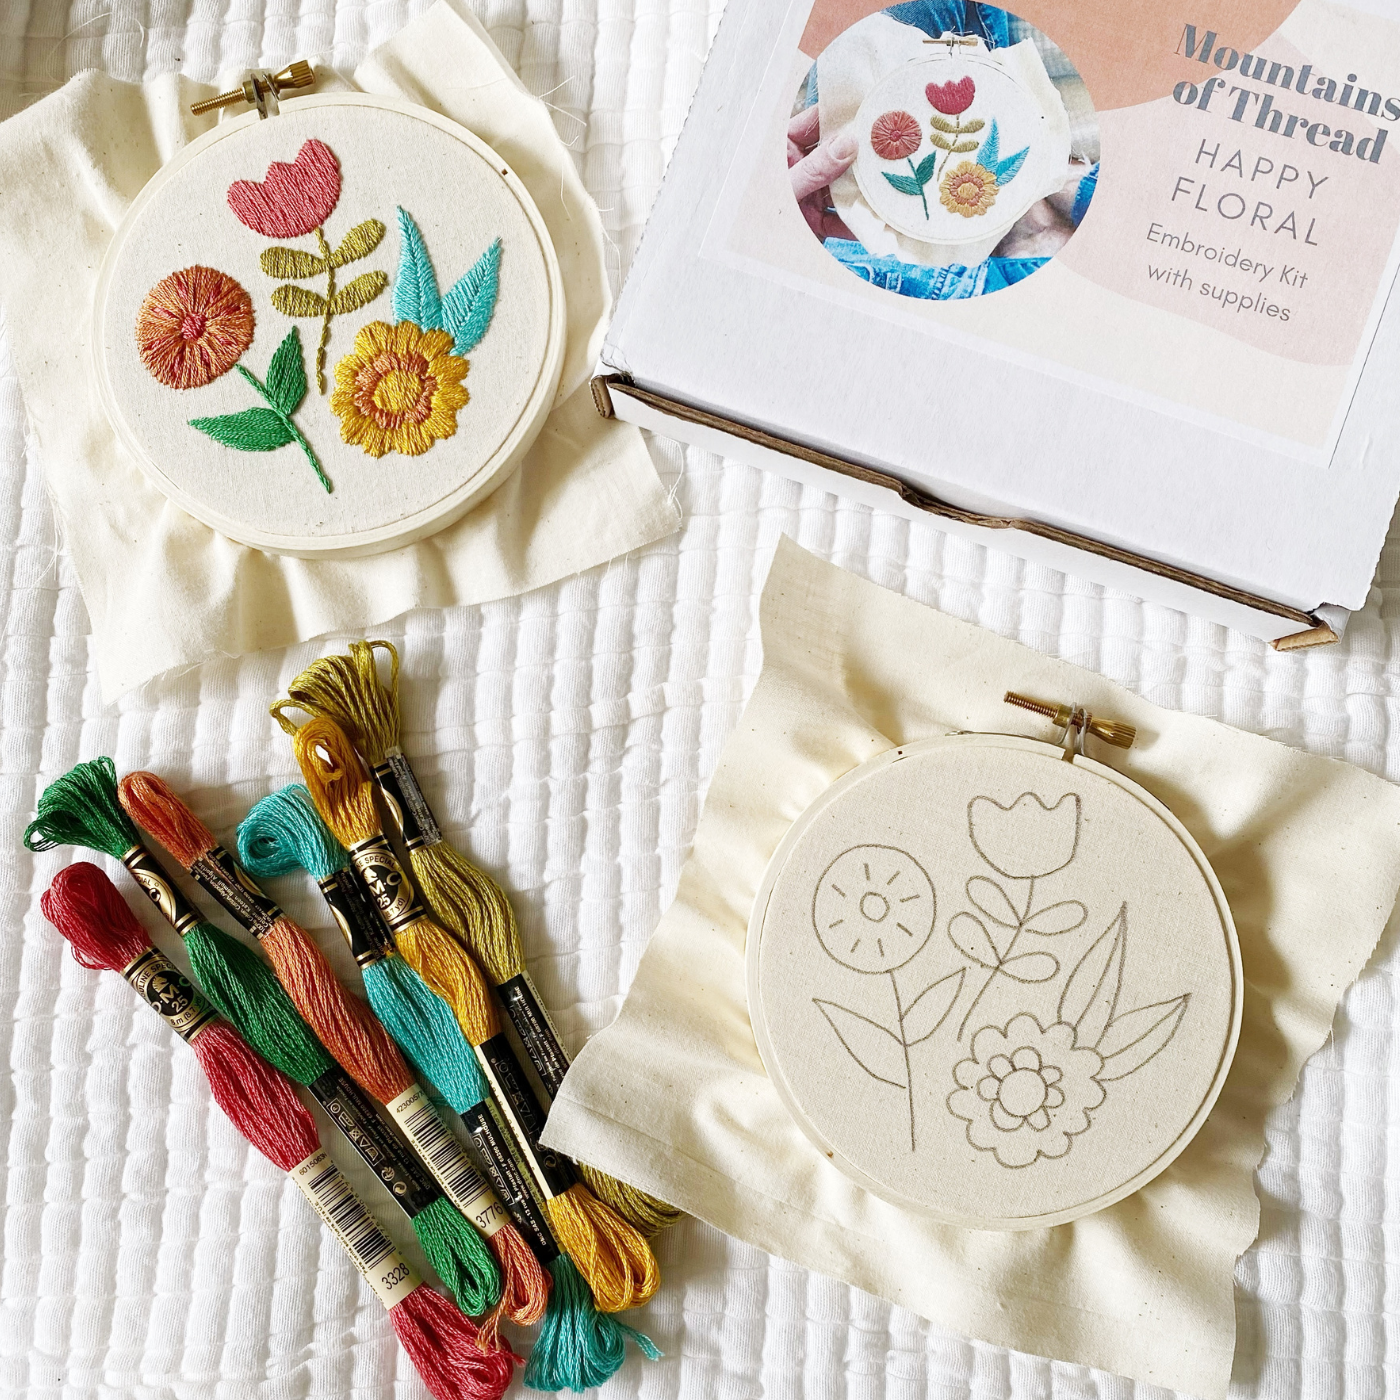 Items from Mountains of Thread’s “Happy Floral” embroidery kit are displayed on a white ribbed blanket. A box for the kit, showing a finished photo of a floral design and with “Mountains of Thread “Happy Floral” embroidery kit with supplies” typed on it in a dark gray font, is in the top right corner. A cream fabric square with a printed design of three large blooms with leaves is to the bottom right bound in a small round wooden embroidery hoop. Six full skeins of embroidery floss, from left to right, burgundy, sage, dusty orange, turquoise, goldenrod and yellowish green are grouped at the bottom left. A completed stitched floral design is at the top left of the photo.